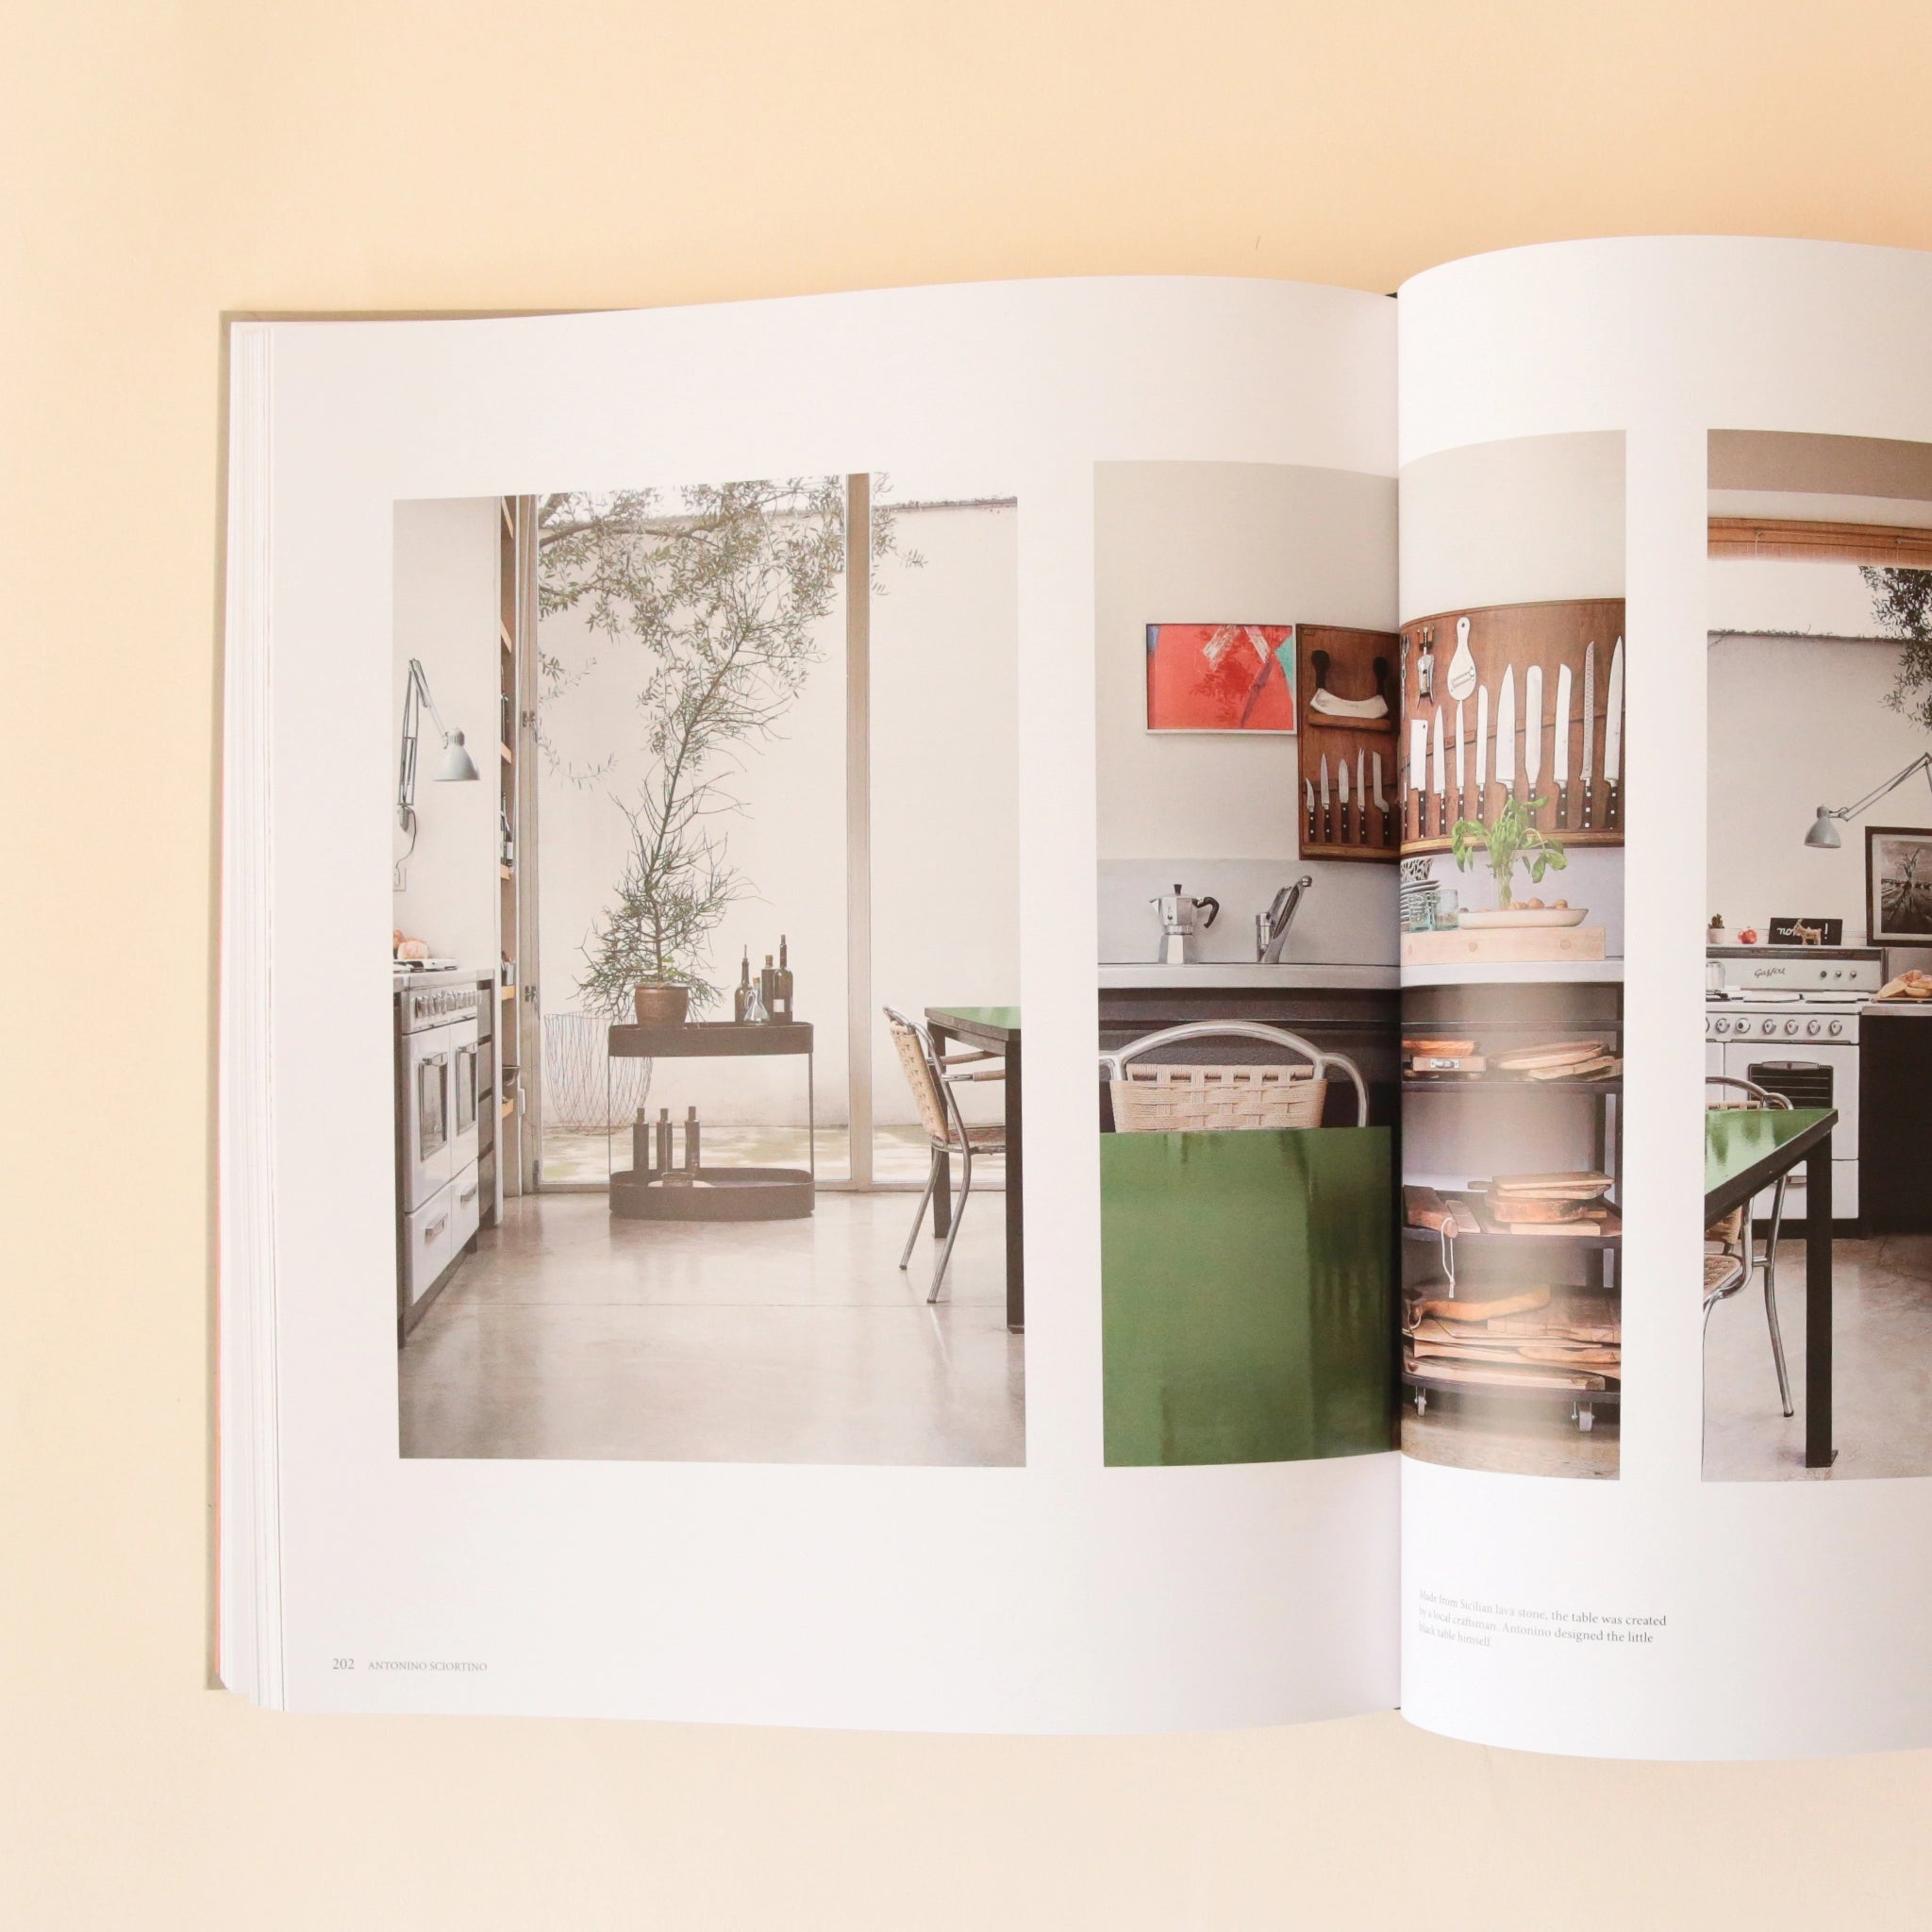 A page open in the book that features a photograph of a beautifully designed kitchen with greenery.